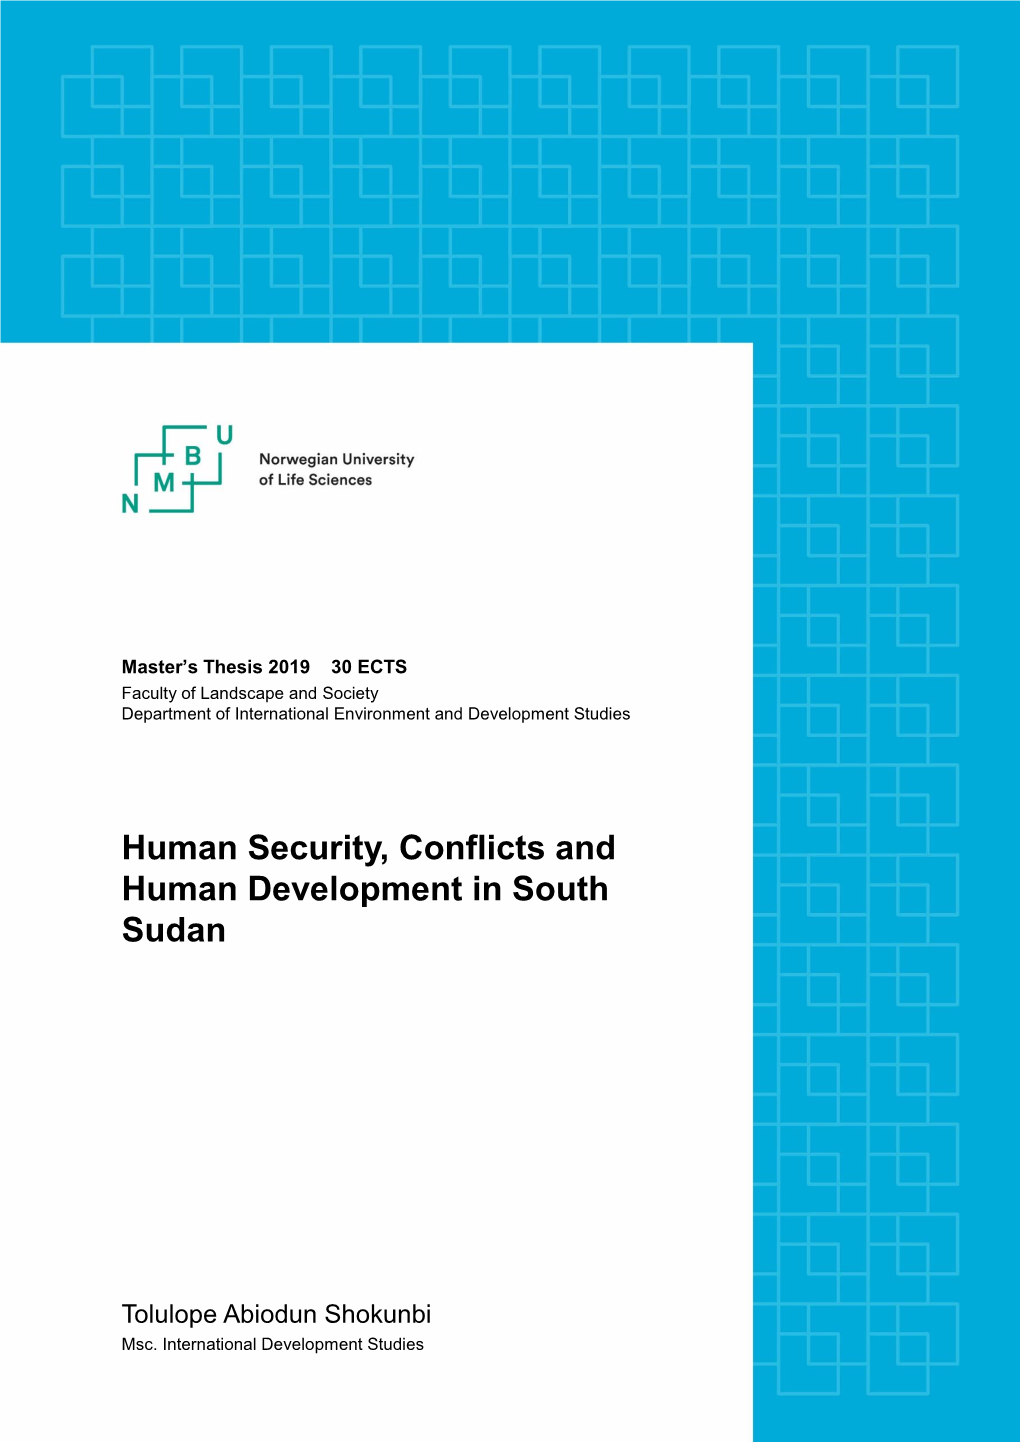 Human Security, Conflicts and Human Development in South Sudan